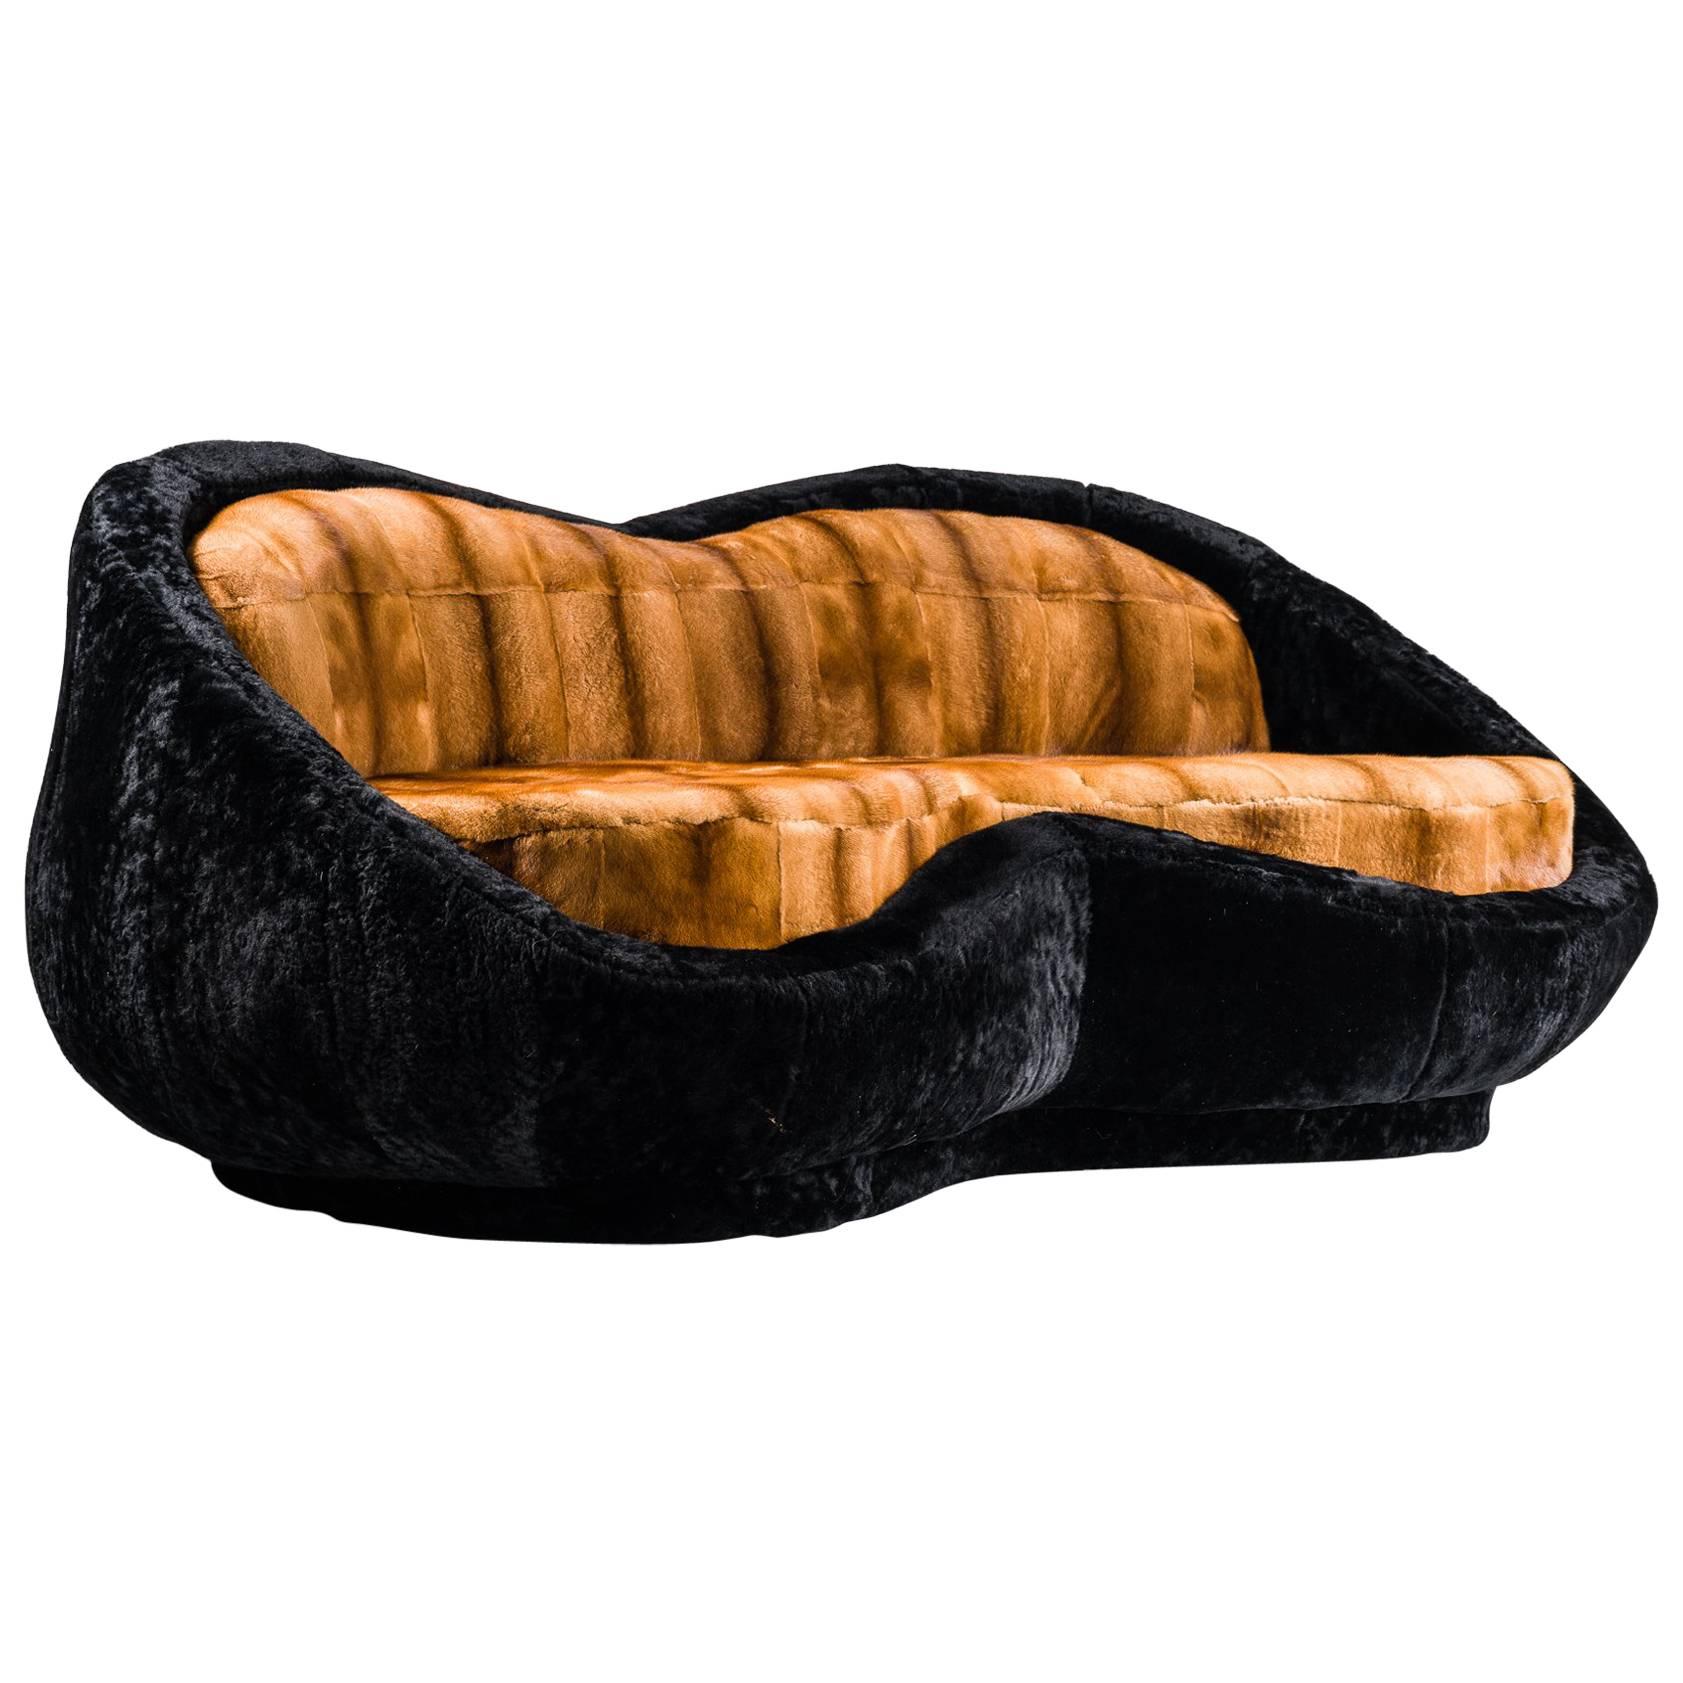 "Sweet" Fur Sofa, Golden Mink and Black Shearling Upholstery For Sale